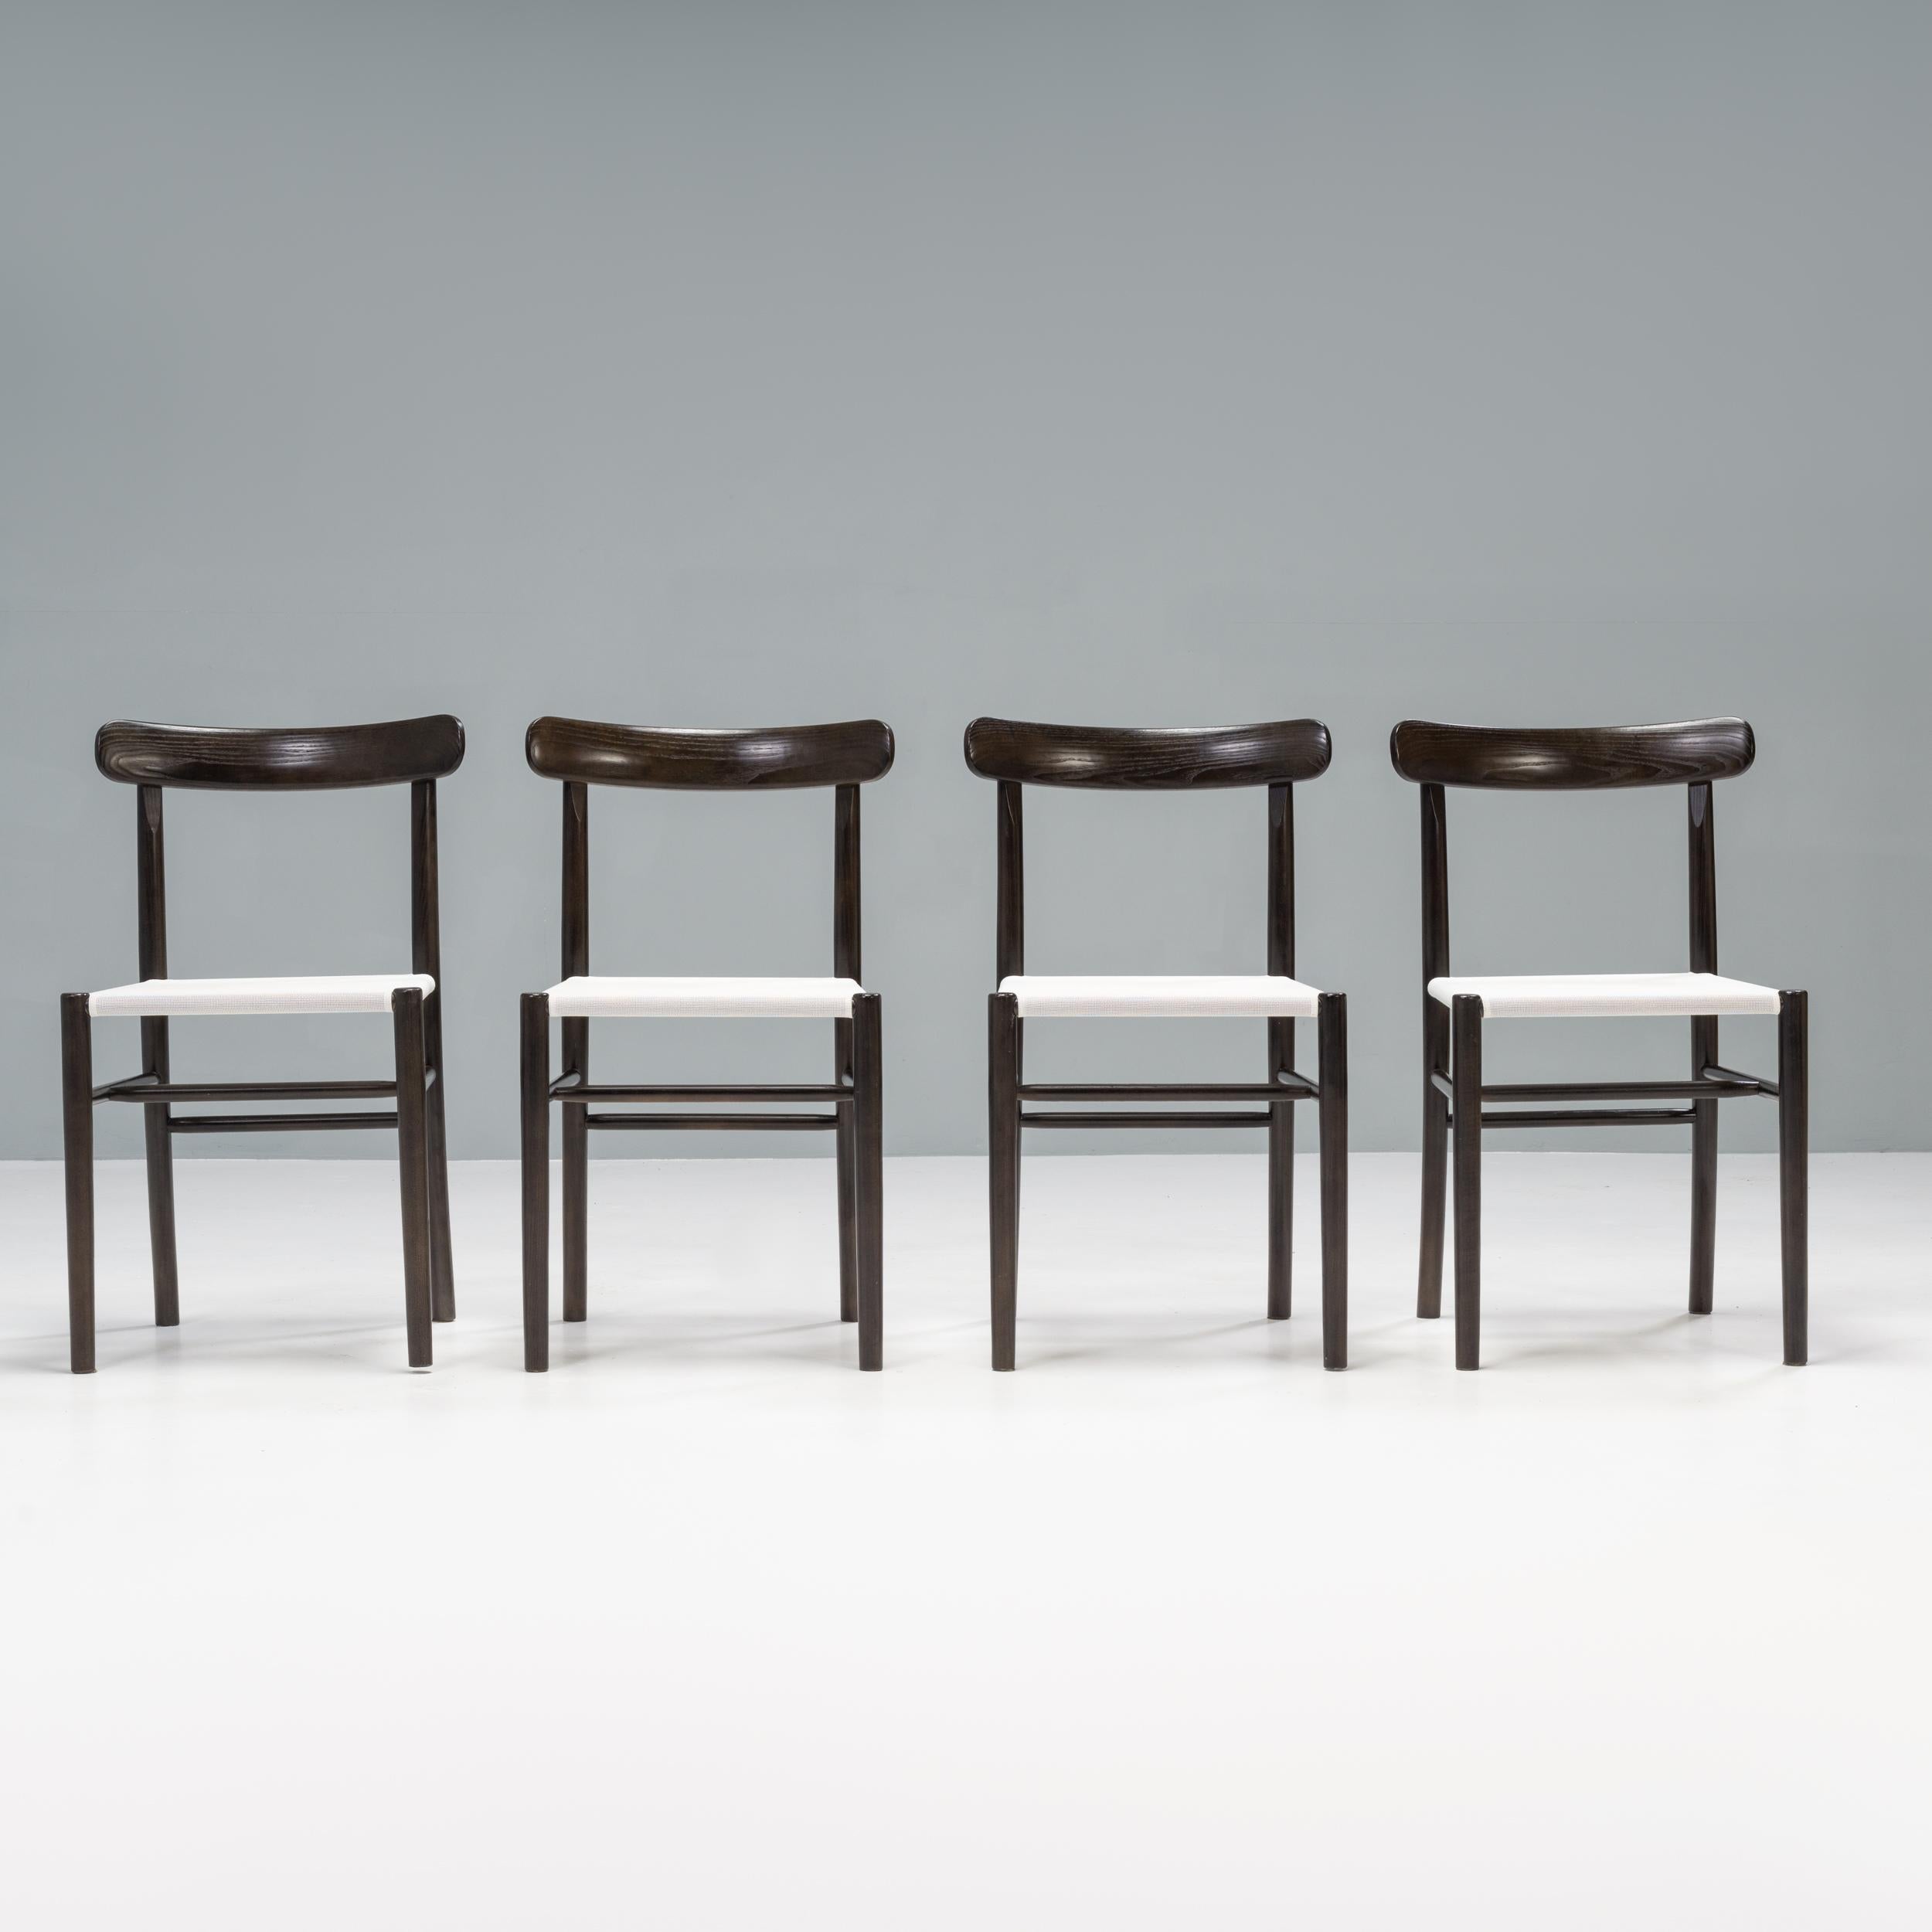 Designed by Jasper Morrison for the Japanese furniture manufacturer Maruni, the Lightwood dining chair collection was inspired by Japanese architecture and design.

Constructed from maple wood with a black urethane finish, the chairs are expertly